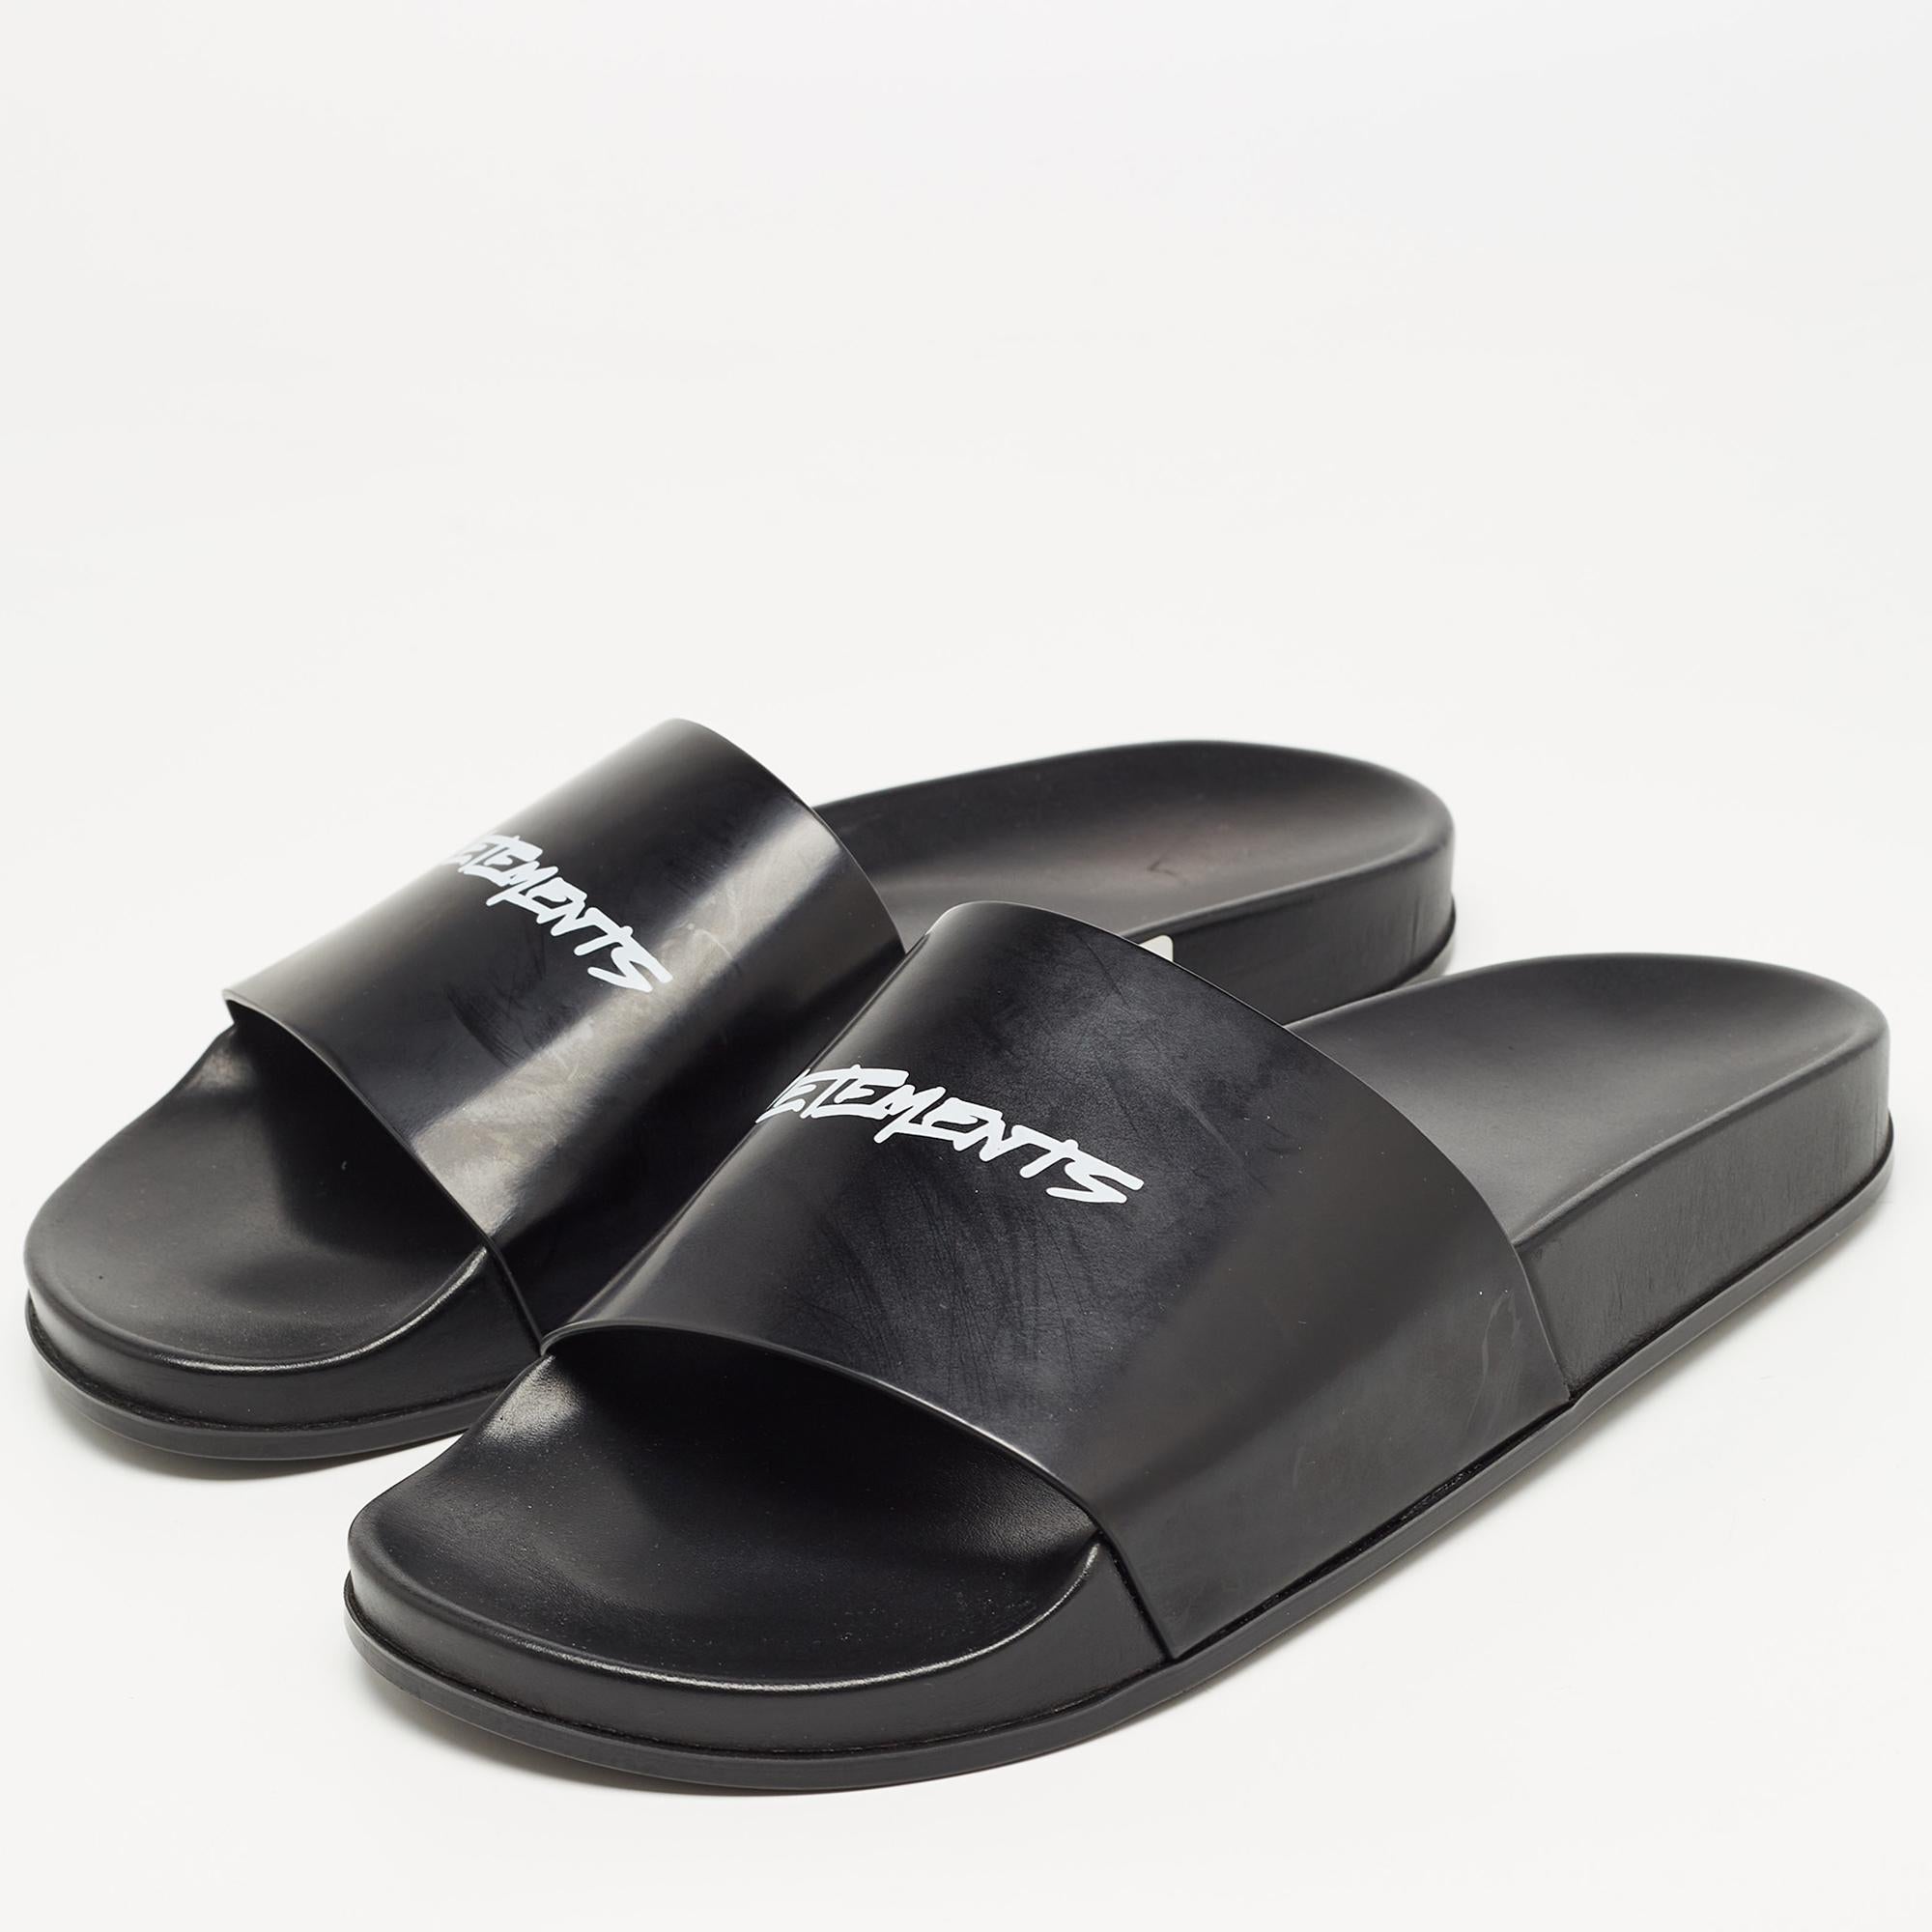 Enhance your casual looks with a touch of high style with these designer slides. Rendered in quality material with a lovely hue adorning its expanse, this pair is a must-have!

Includes: Original Box